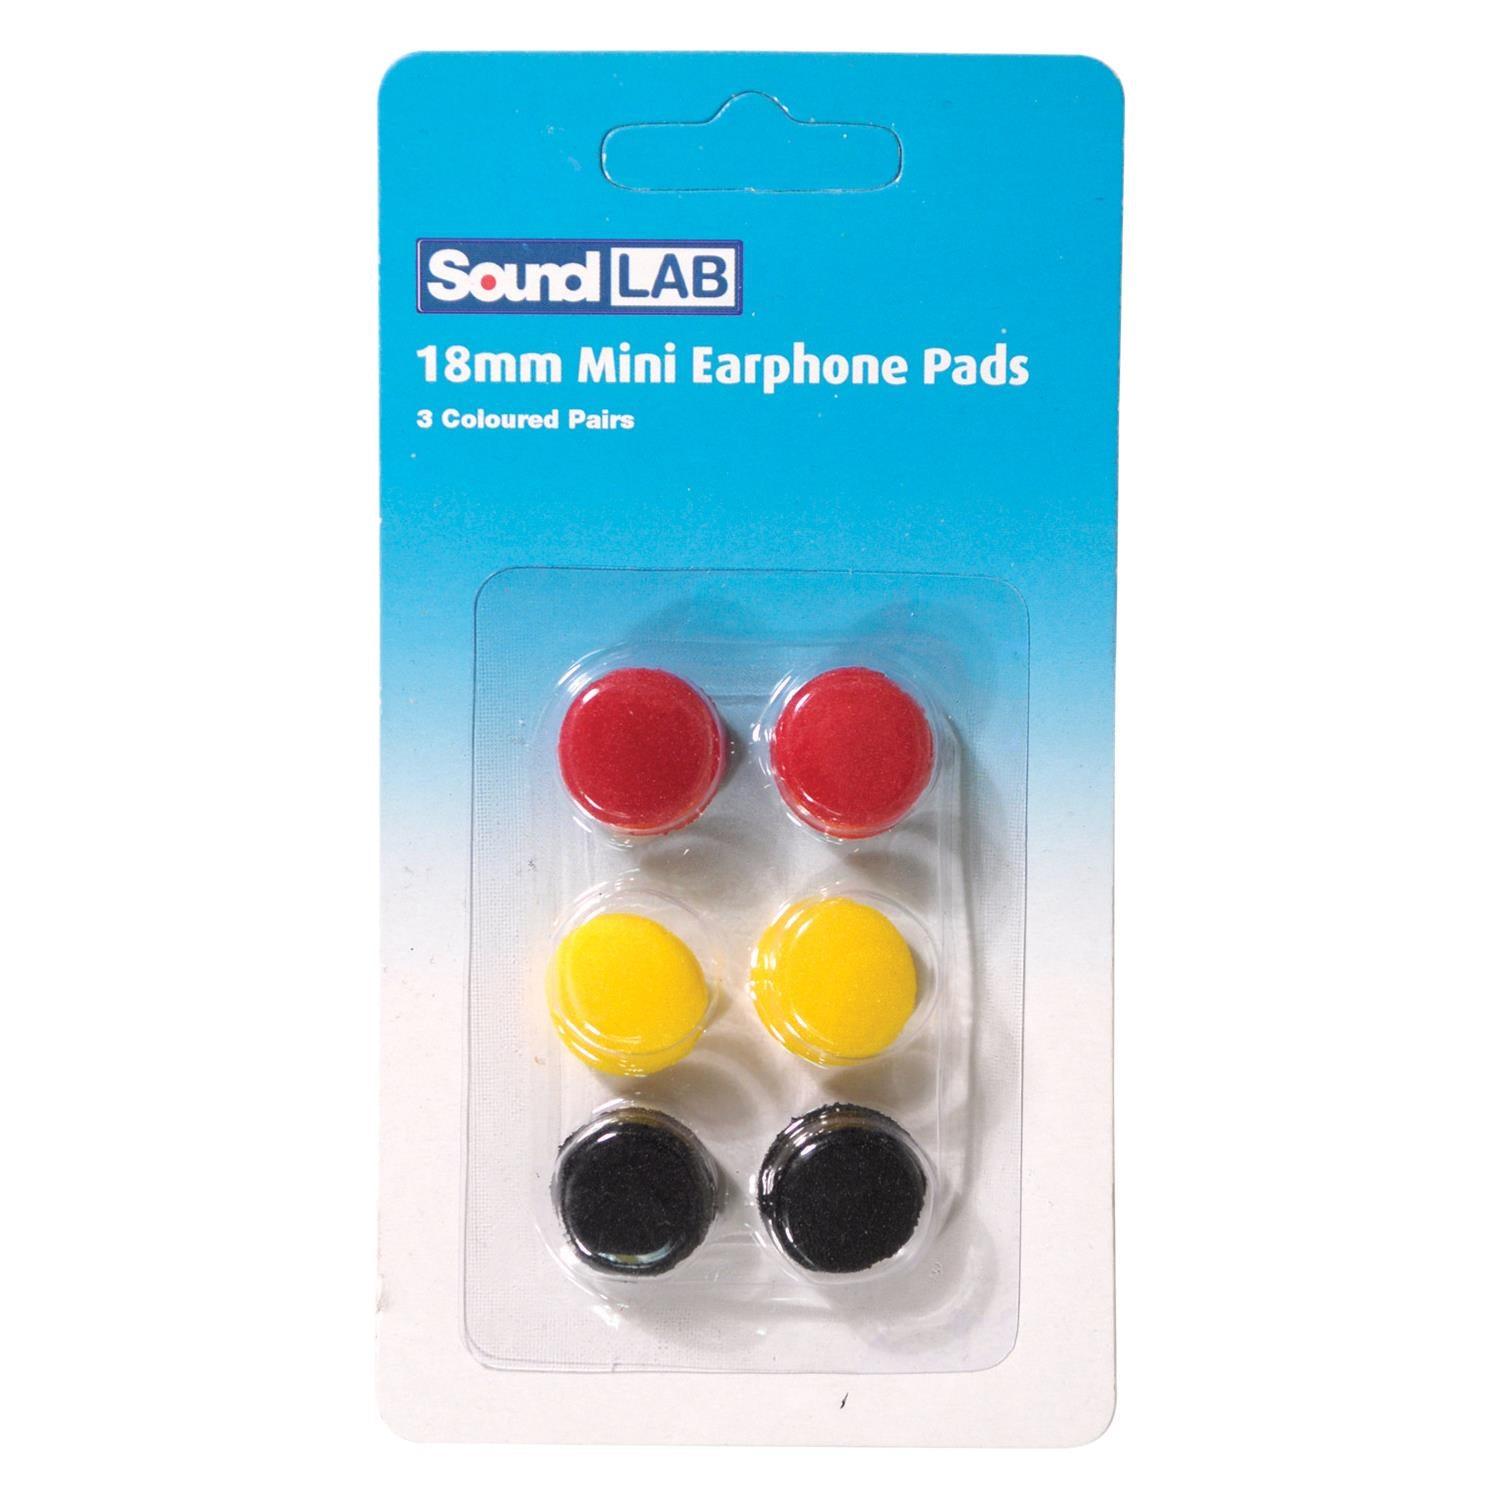 3 x Soundlab Coloured Replacement Ear phone Pads 18mm - DY Pro Audio